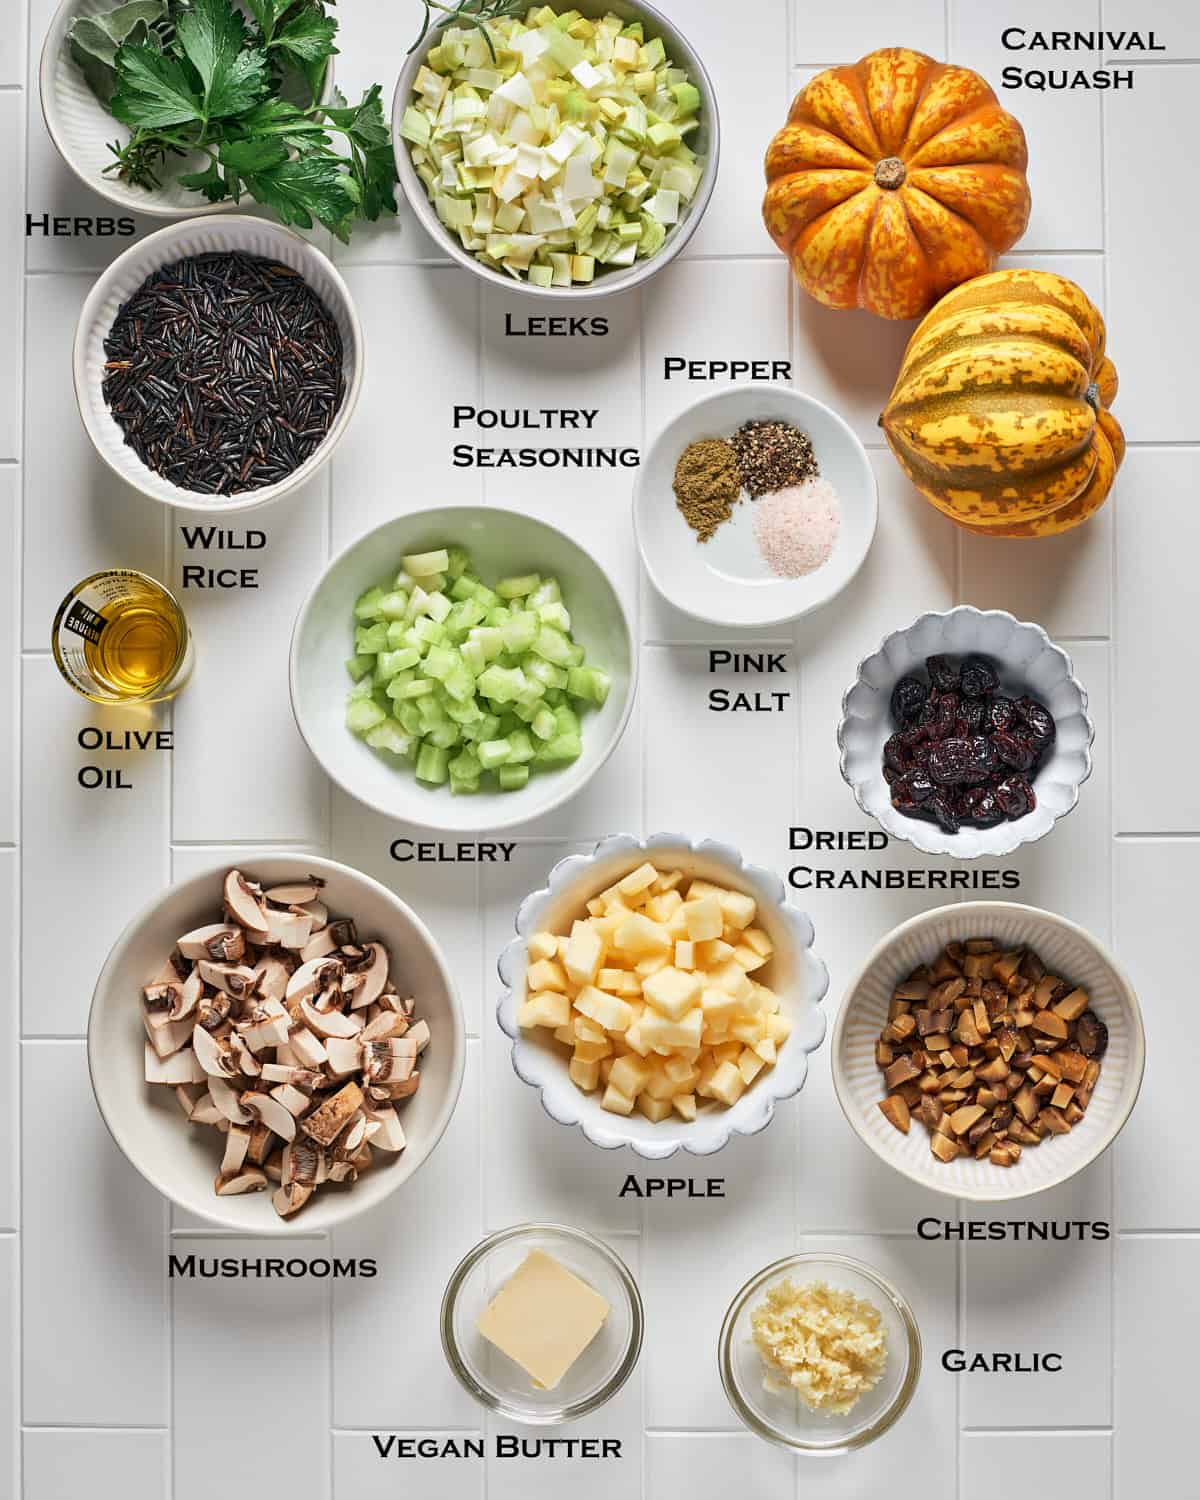 Ingredients to make Stuffed Carnival Squash with Wild Rice, Mushrooms, and Leeks on a white tile surface.